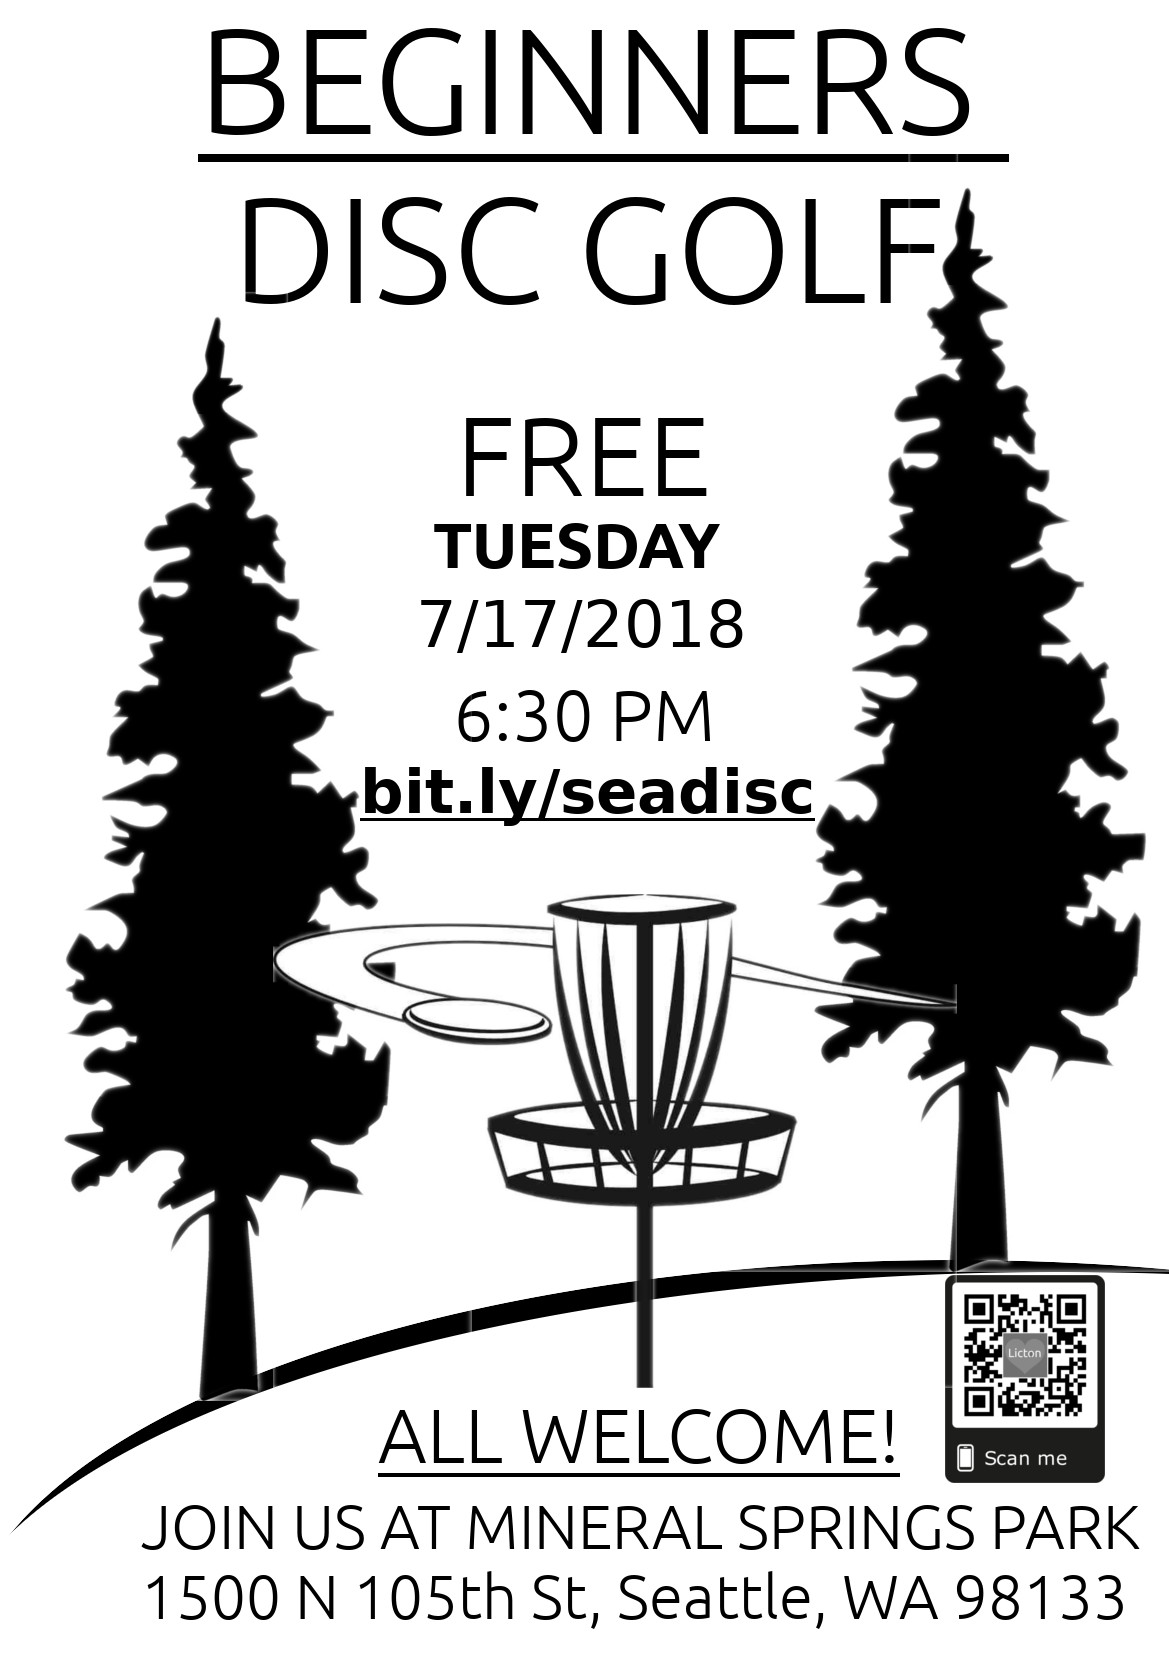 Learn to Disc Golf!